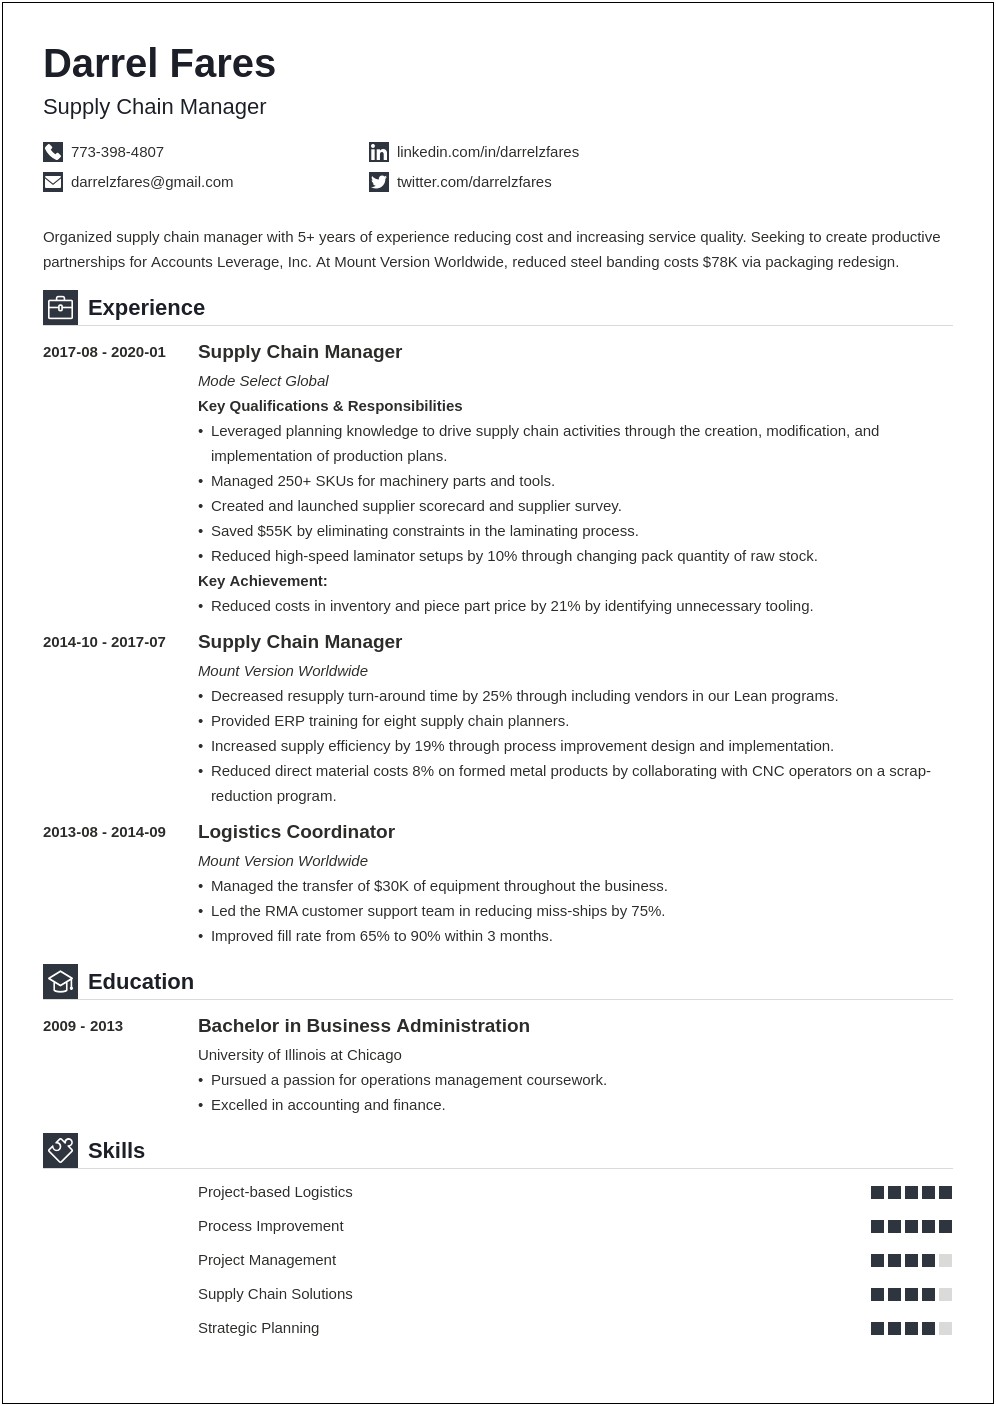 Resume Objection For Moving Into Management